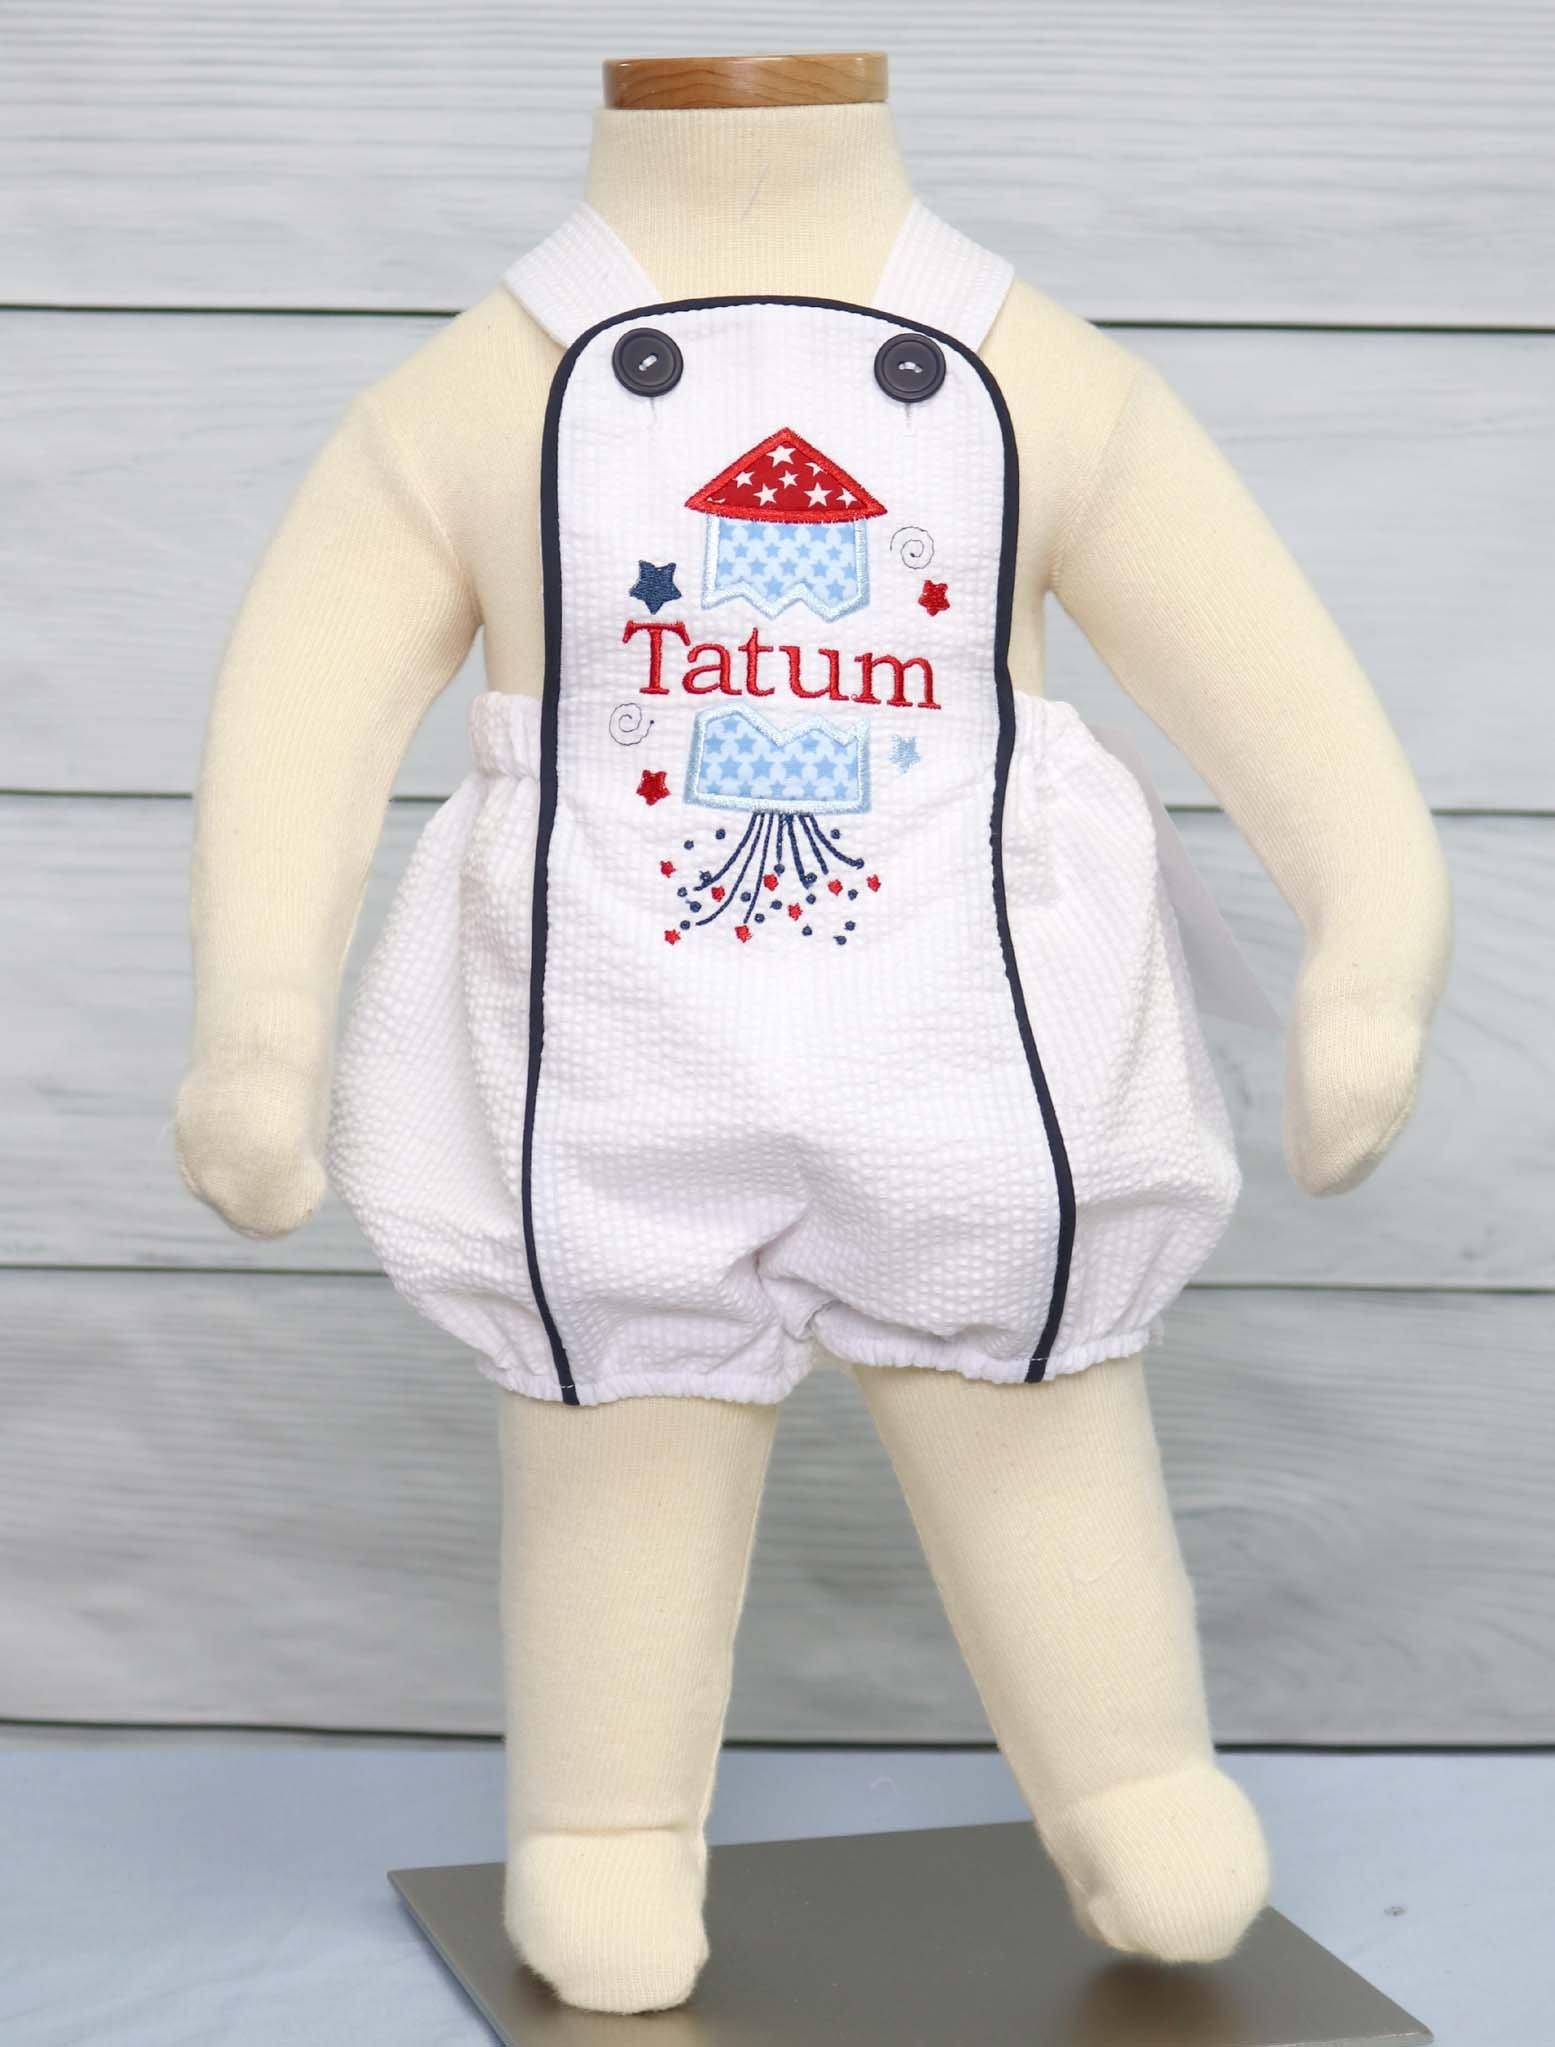 fourth of july baby boy outfits